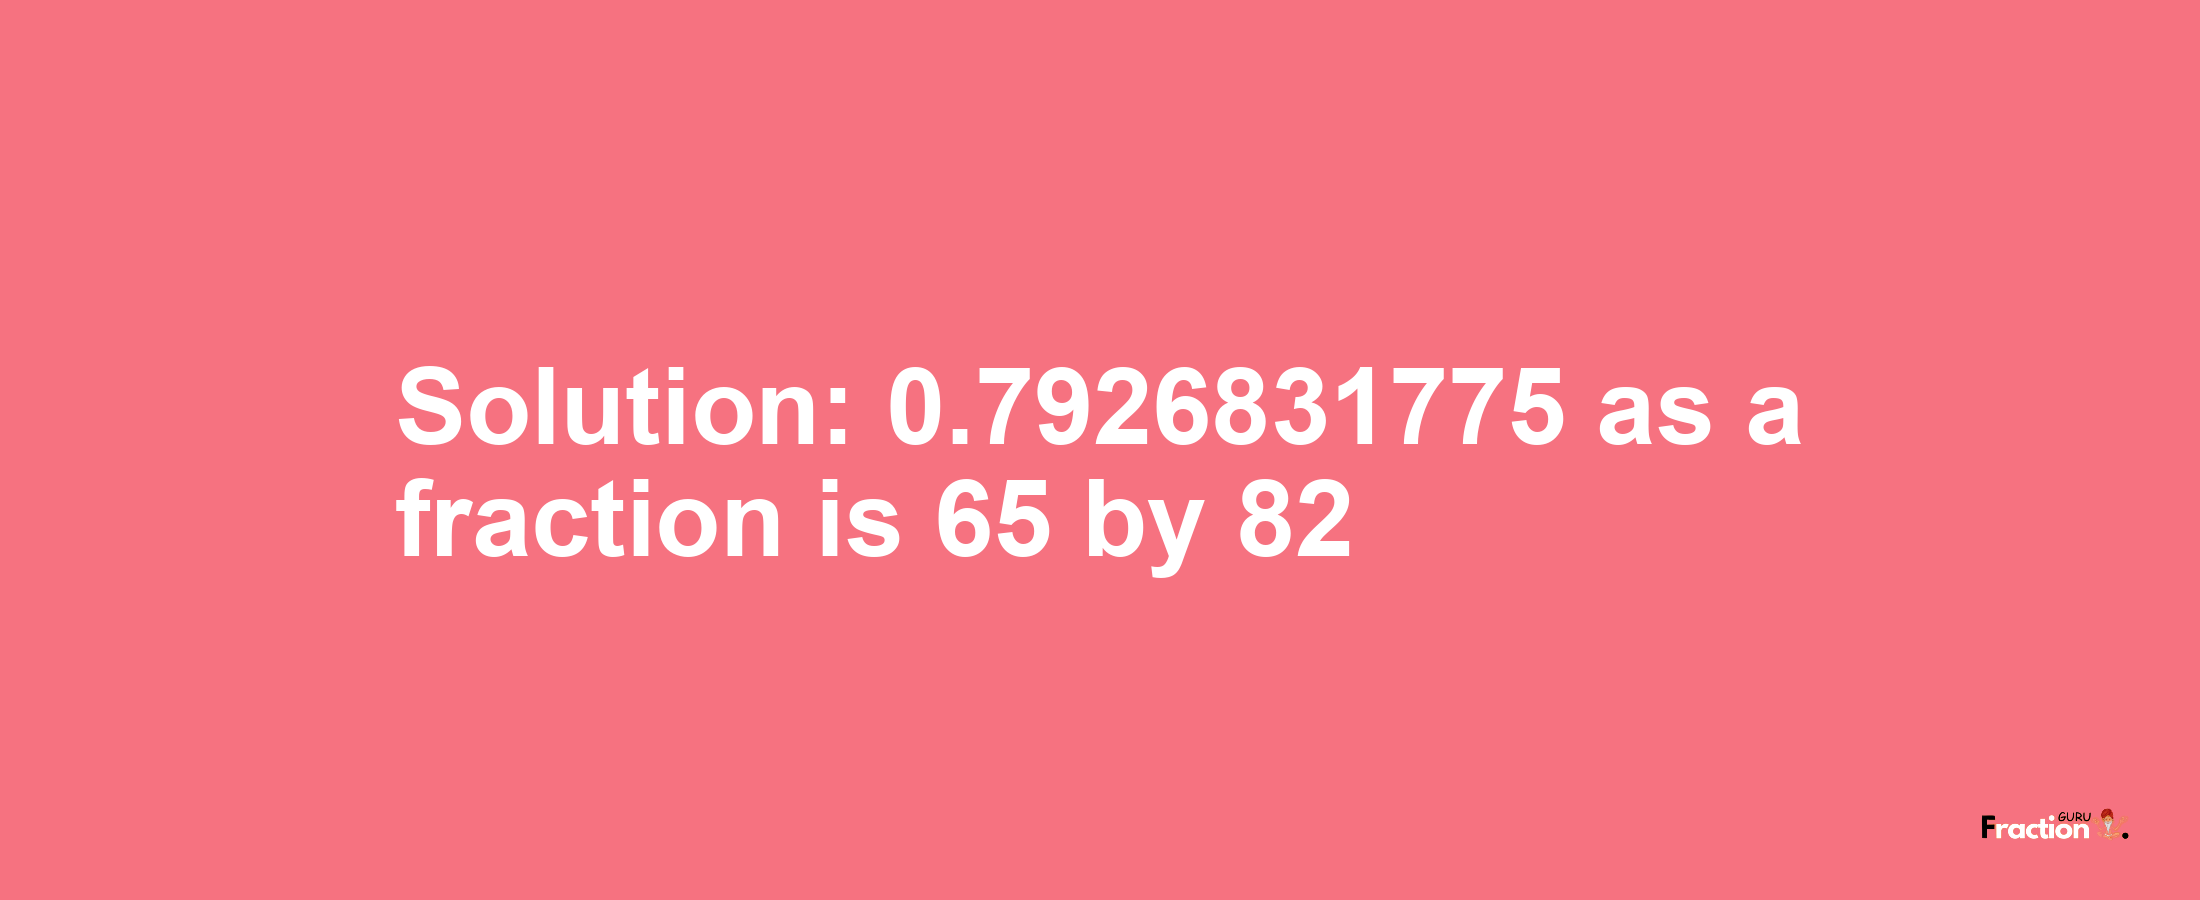 Solution:0.7926831775 as a fraction is 65/82